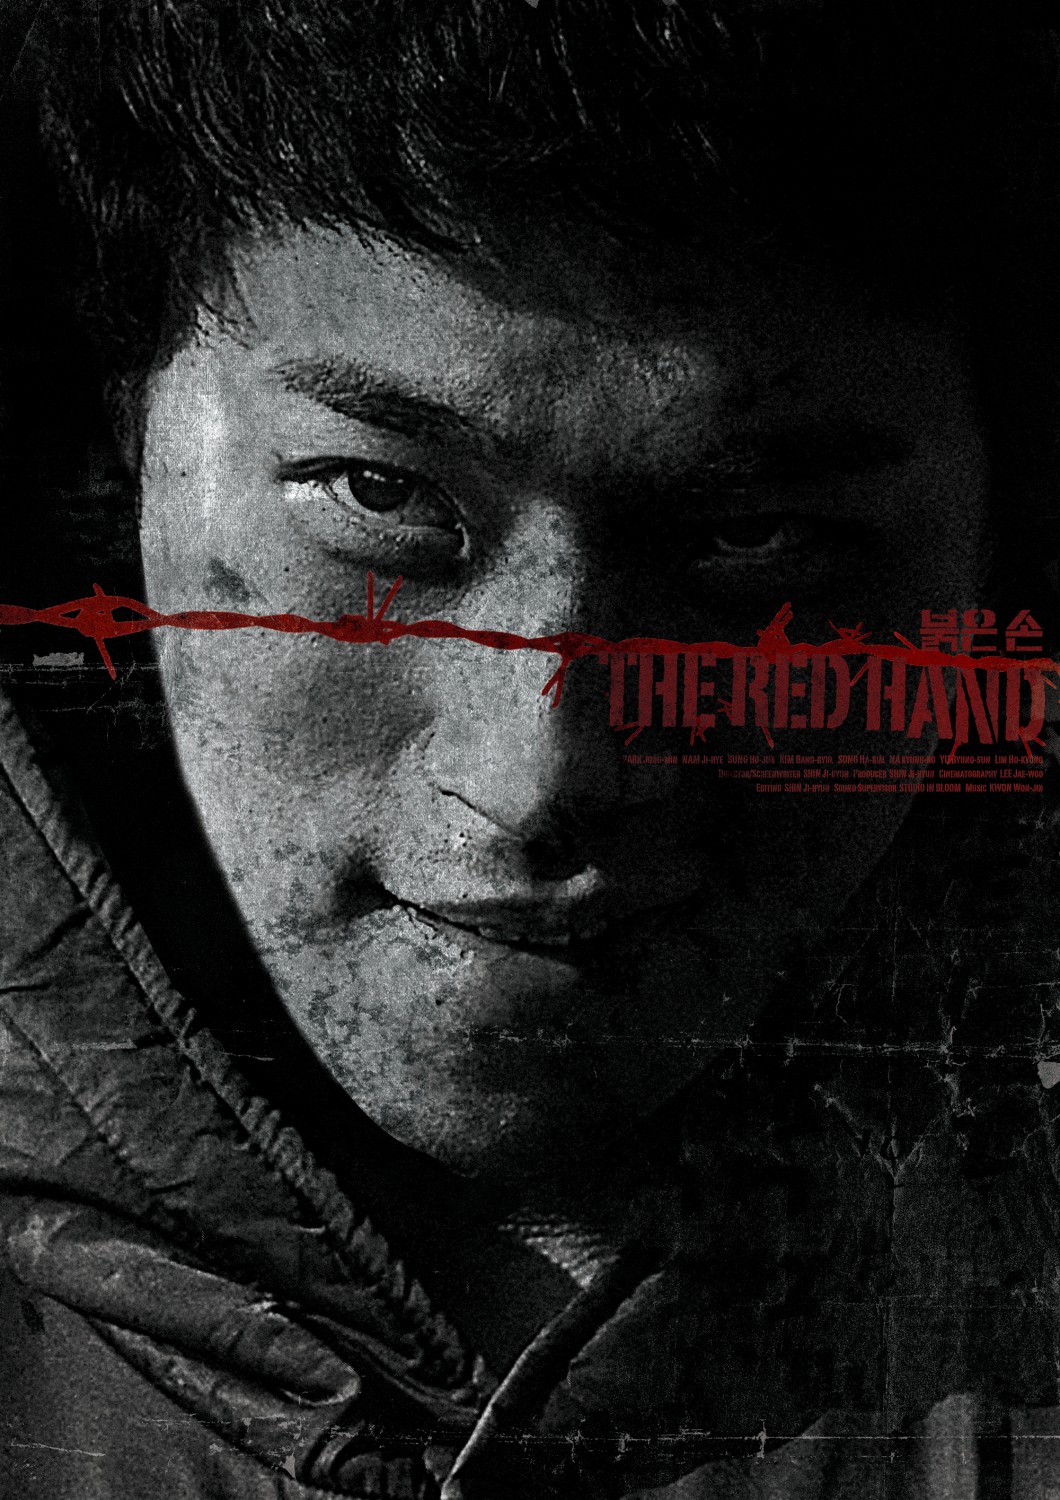 Extra Large Movie Poster Image for The Red Hand